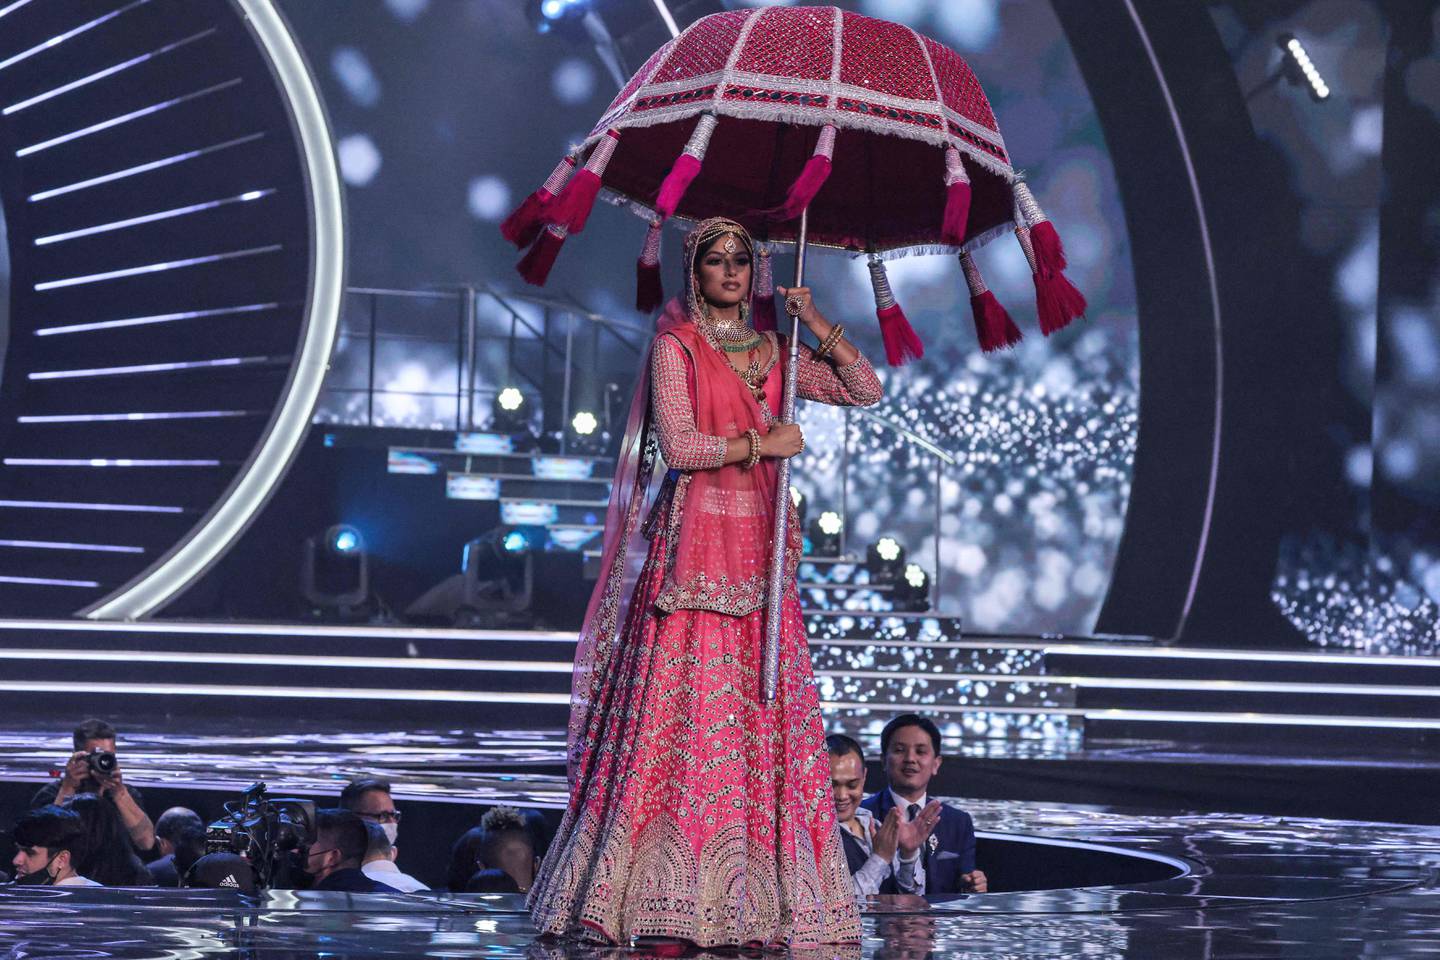 Miss India Harnaaz Sandhu wore a gold embellished pink lehenga and carried a traditional wedding parasol. AFP